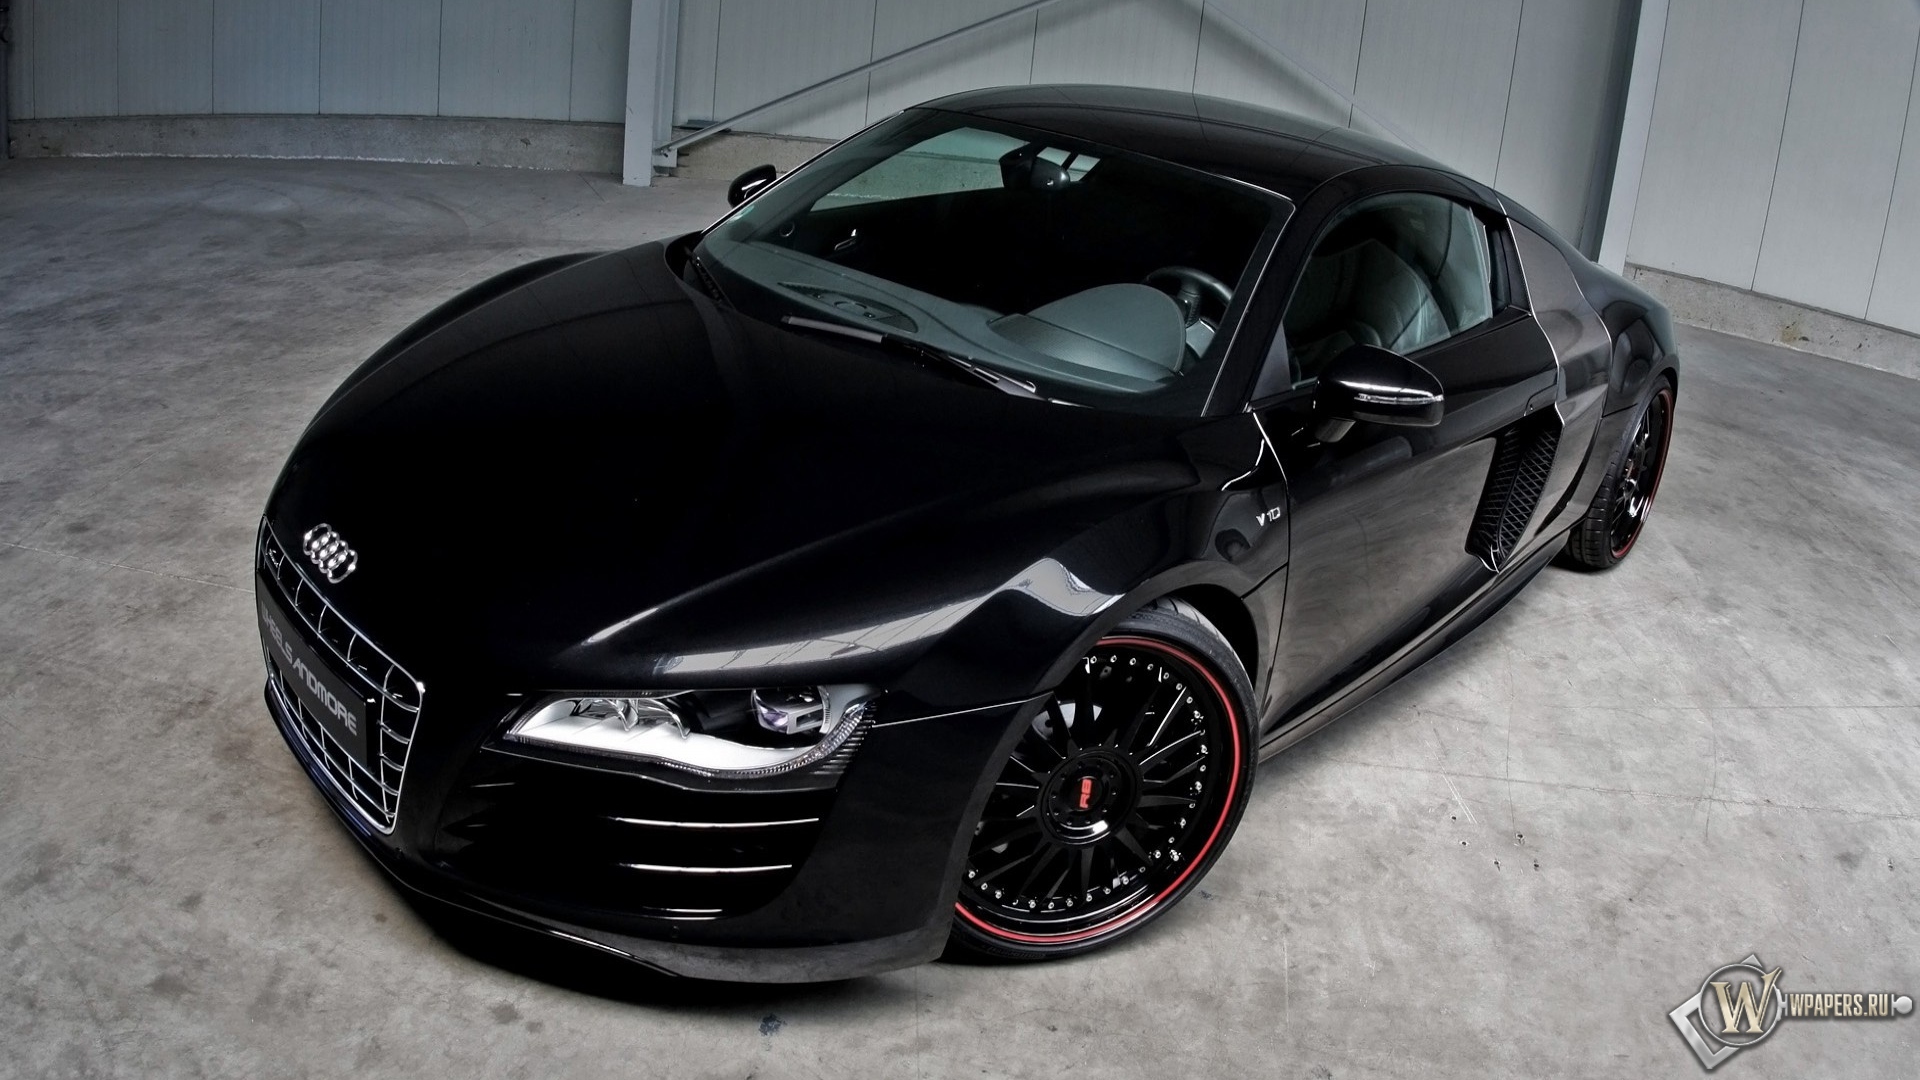 2011 Wheelsandmore Audi R8 V10 .6 - Front Angle Top 1920x1080